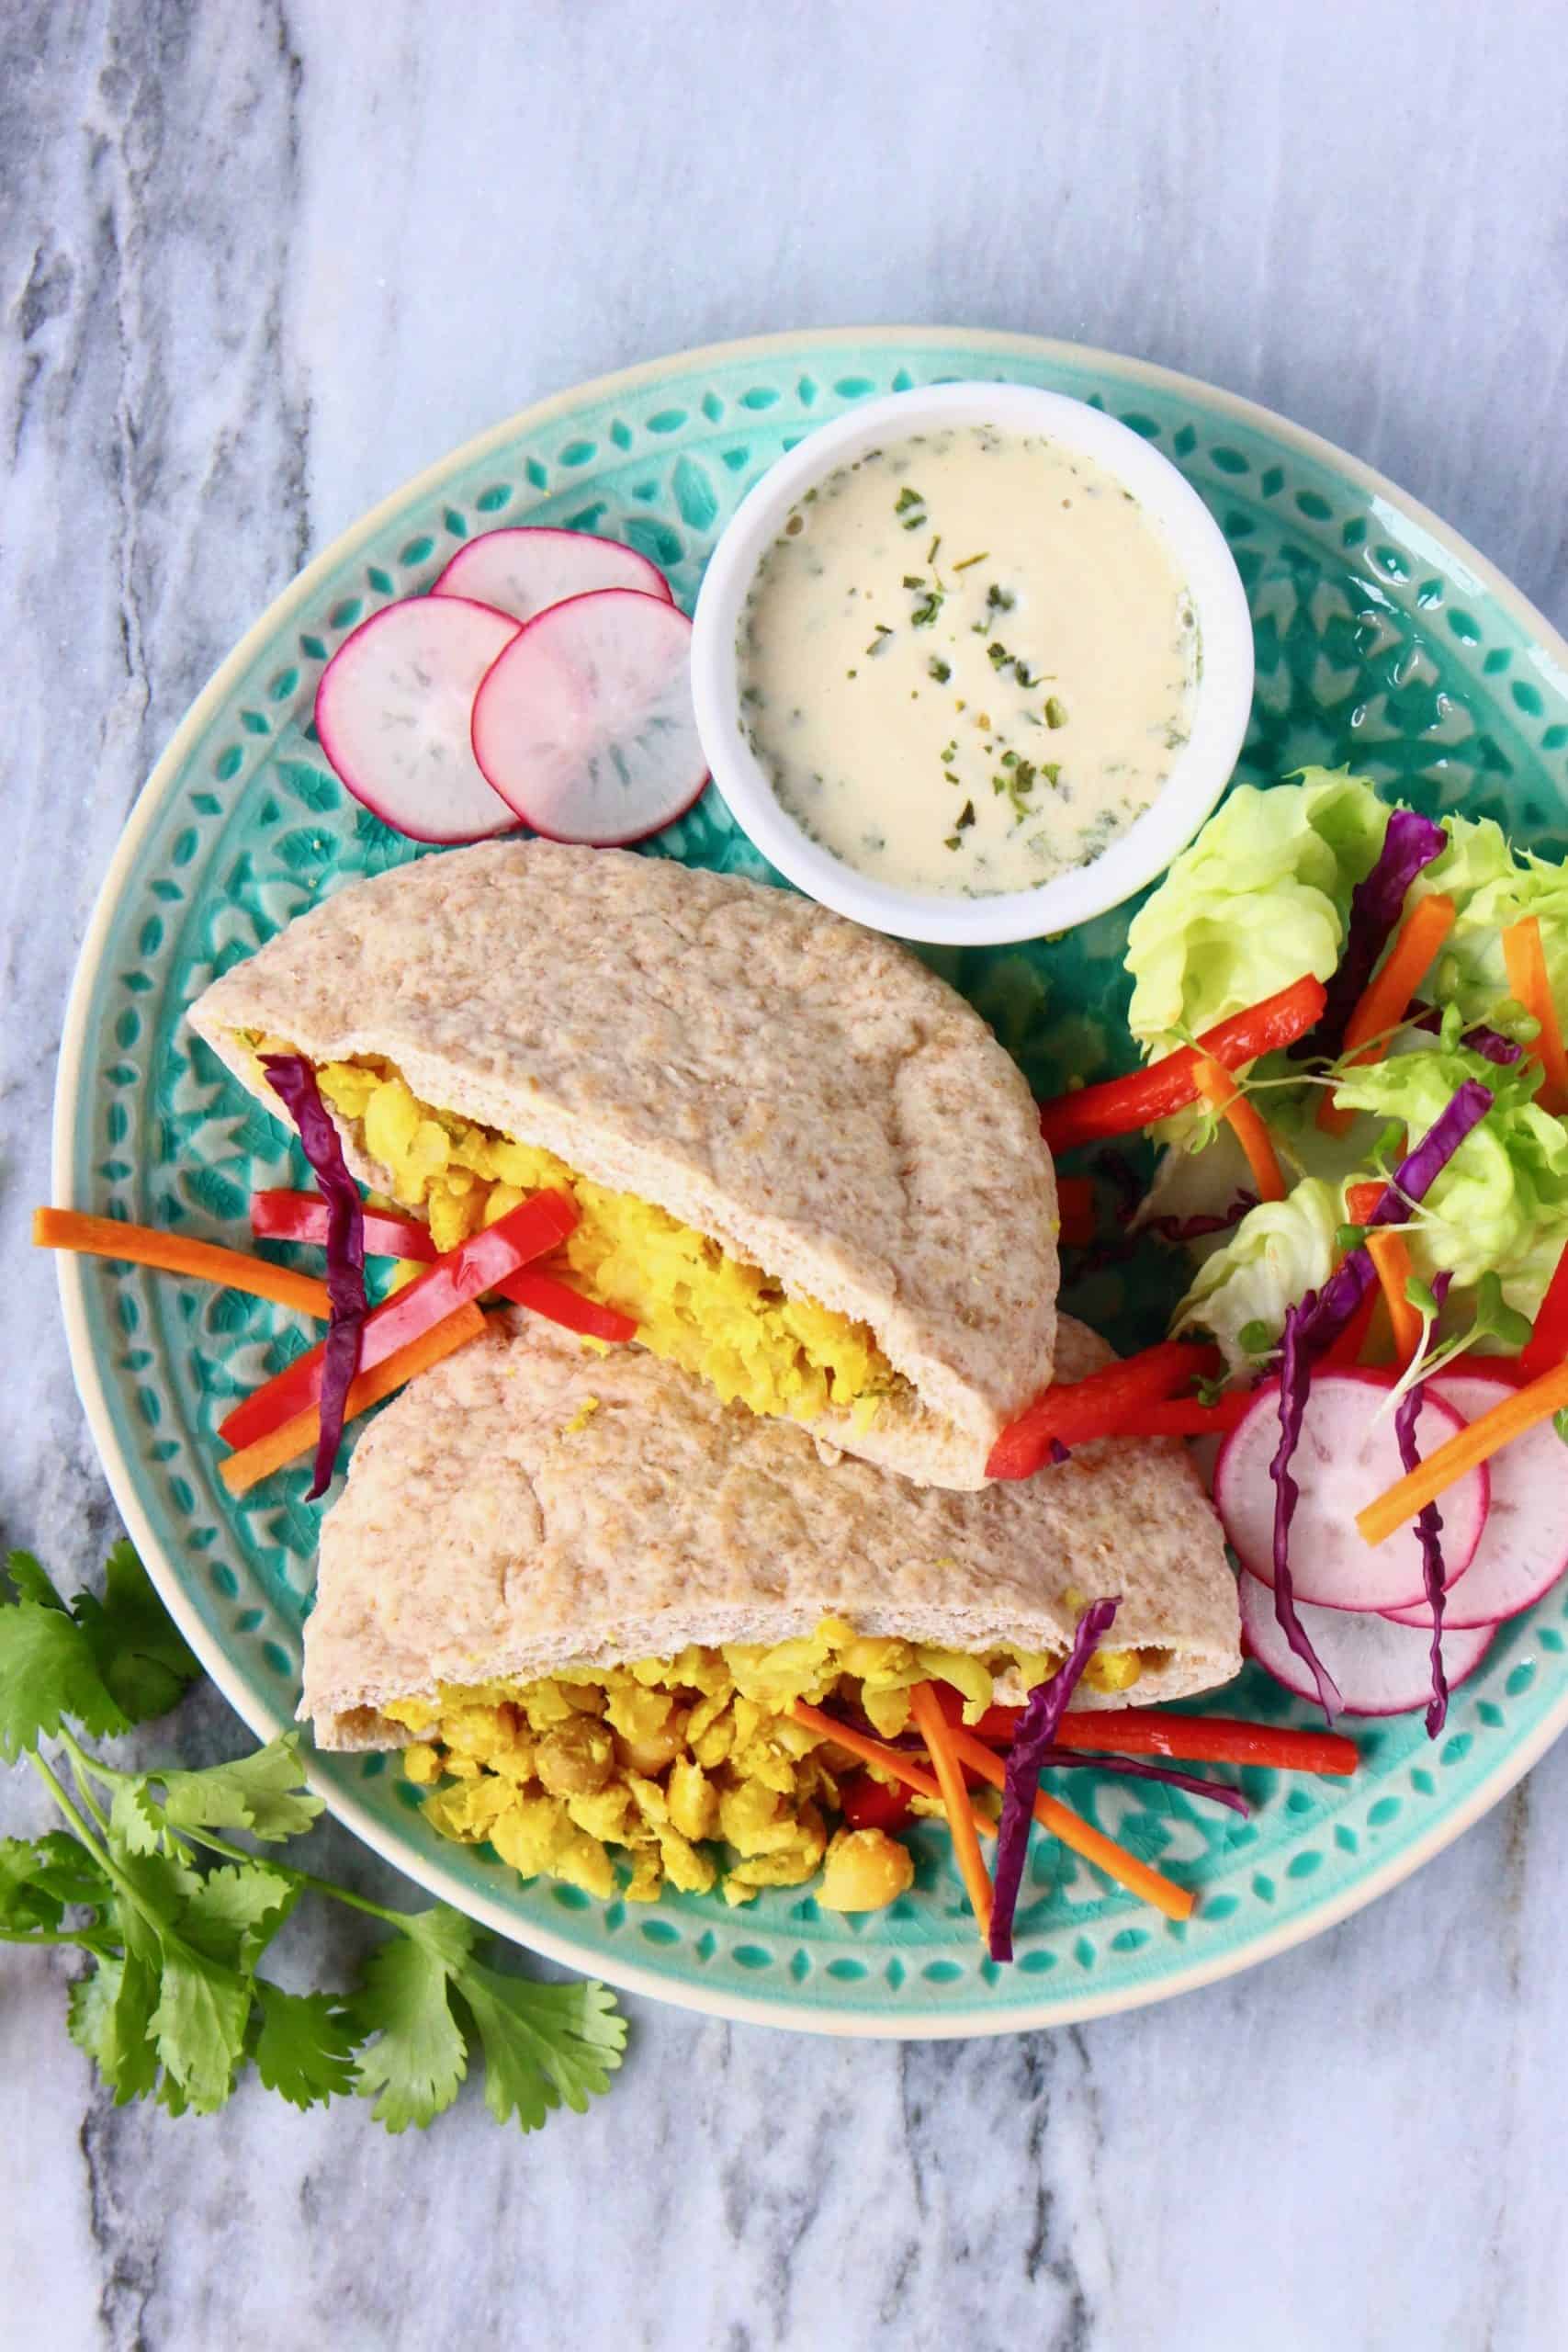 Lazy falafel made with chickpeas in pitta bread with salad and a tahini sauce on a blue plate